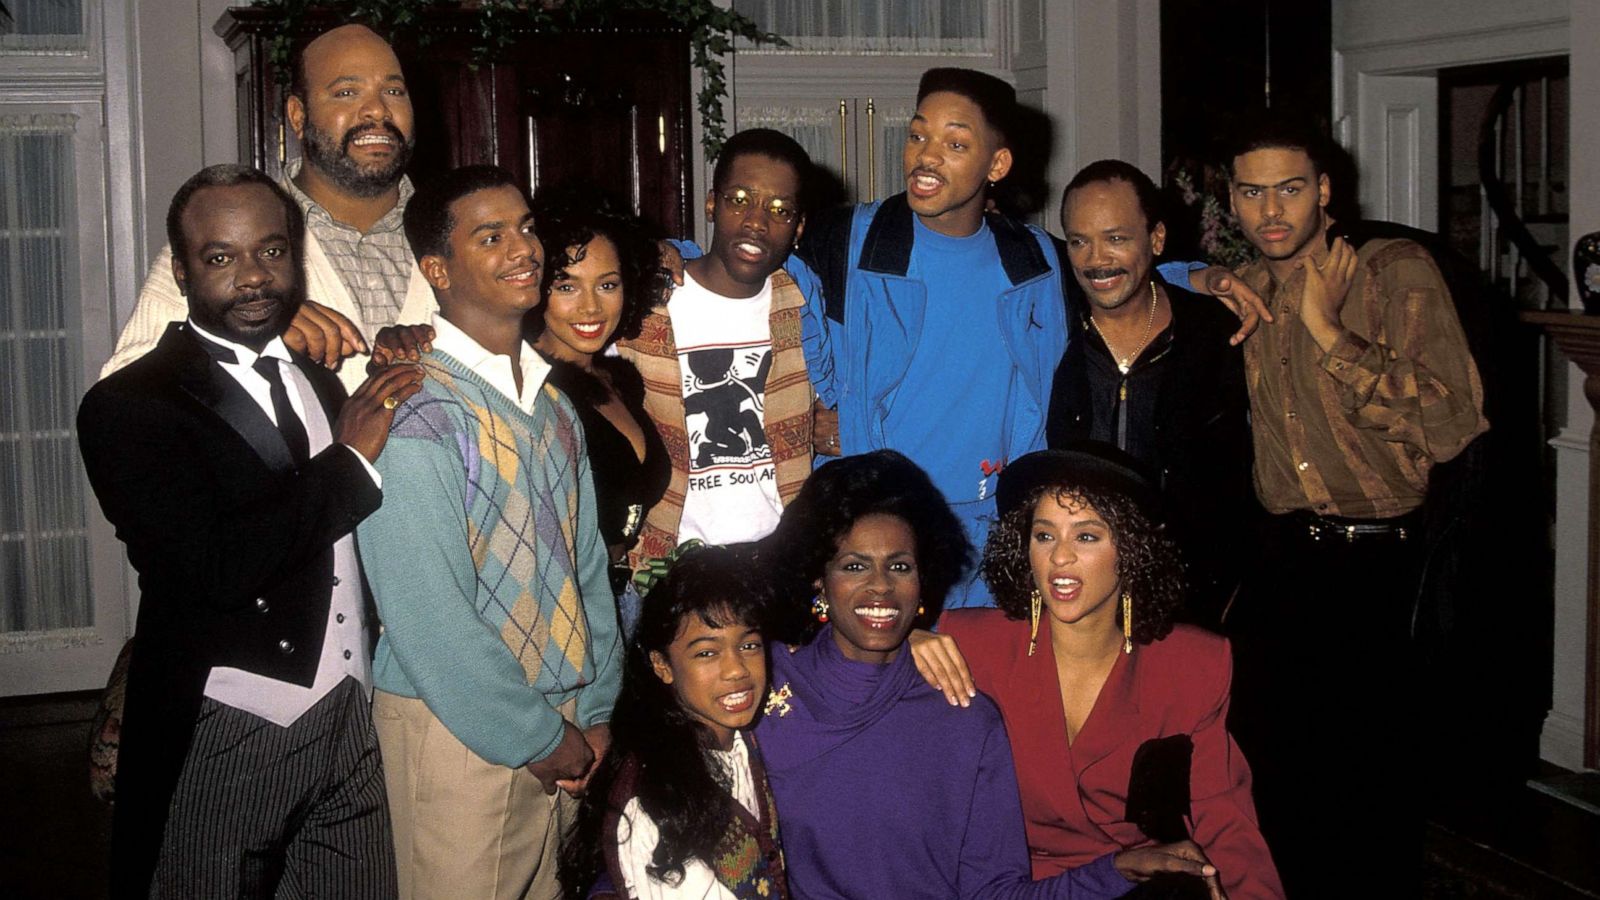 Fresh Prince of Bel-Air: Best fashion from the original series